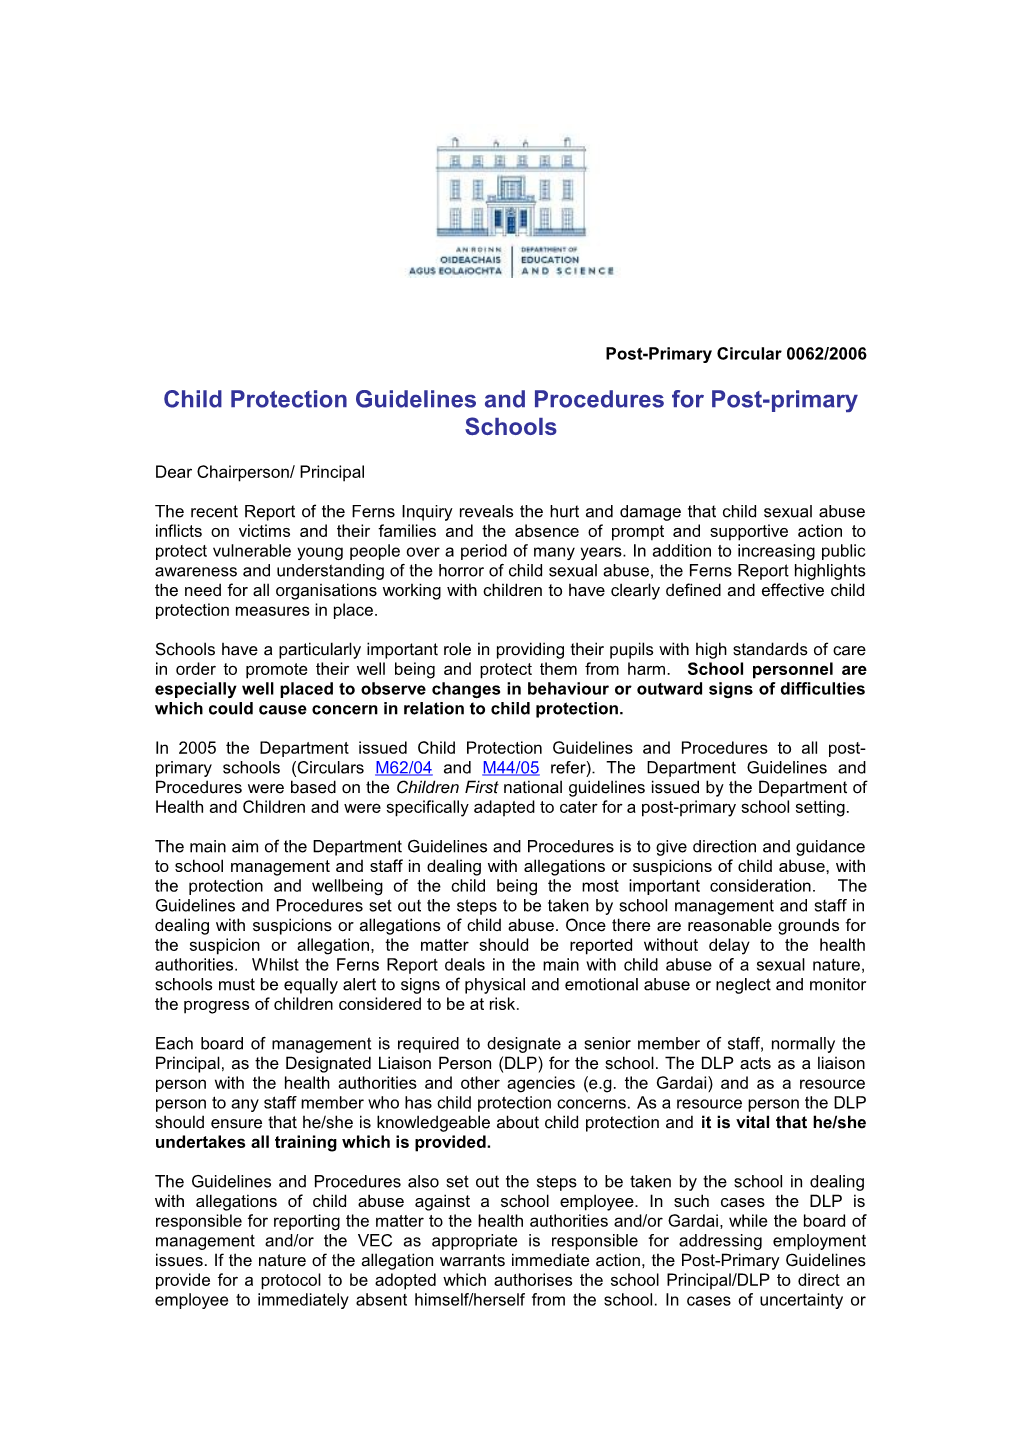 Child Protection Guidelines and Procedures for Post-Primary Schools